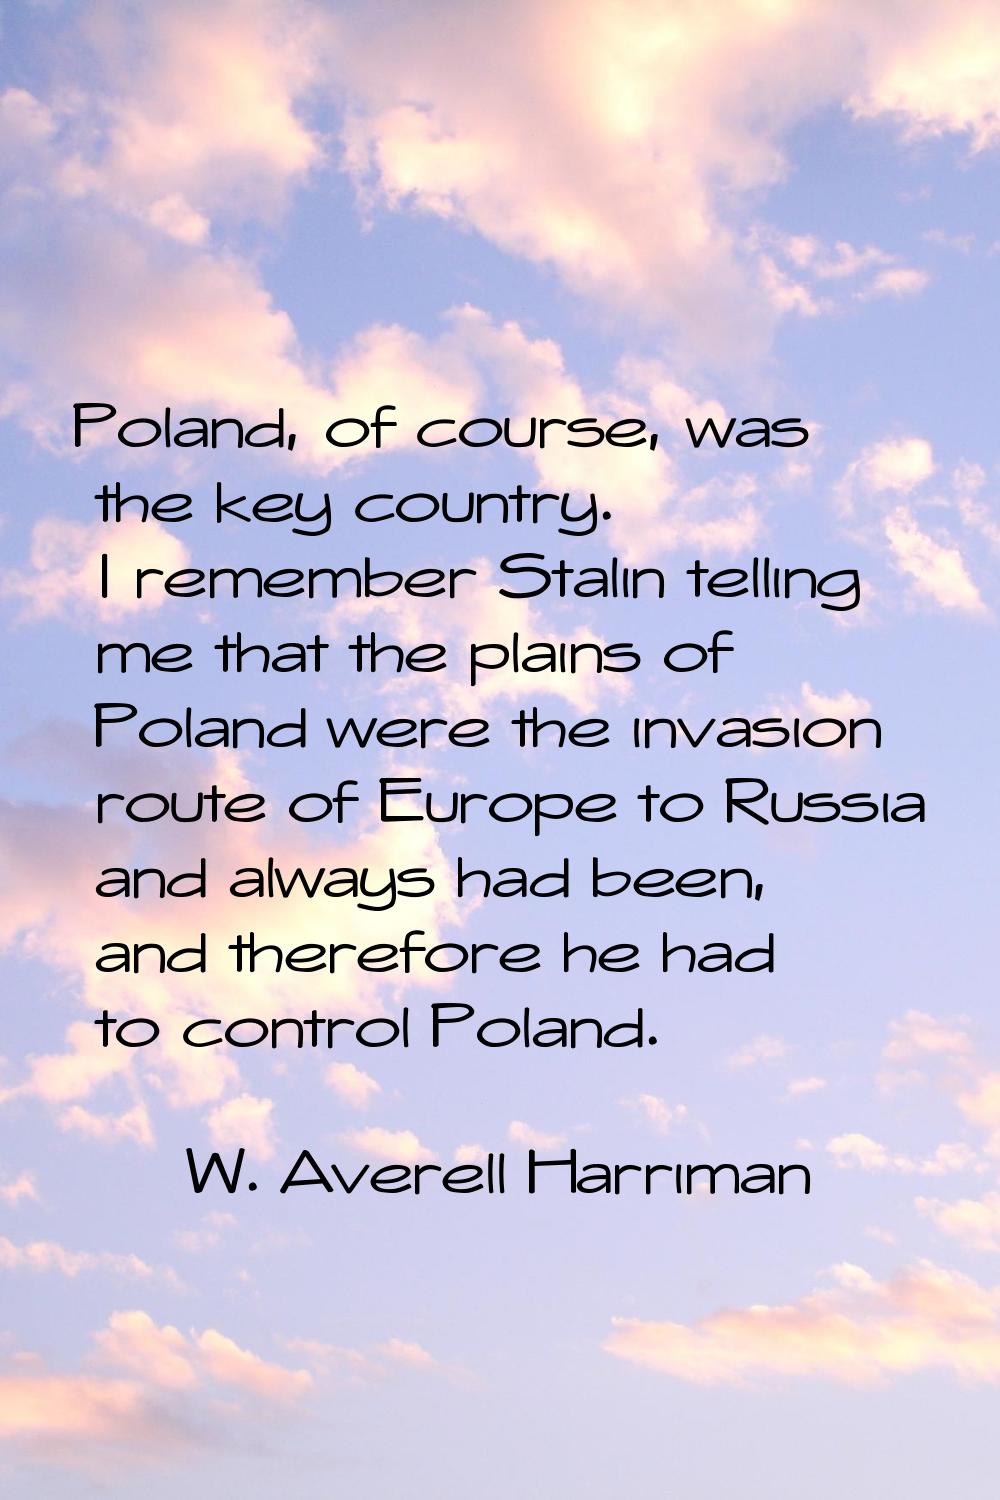 Poland, of course, was the key country. I remember Stalin telling me that the plains of Poland were